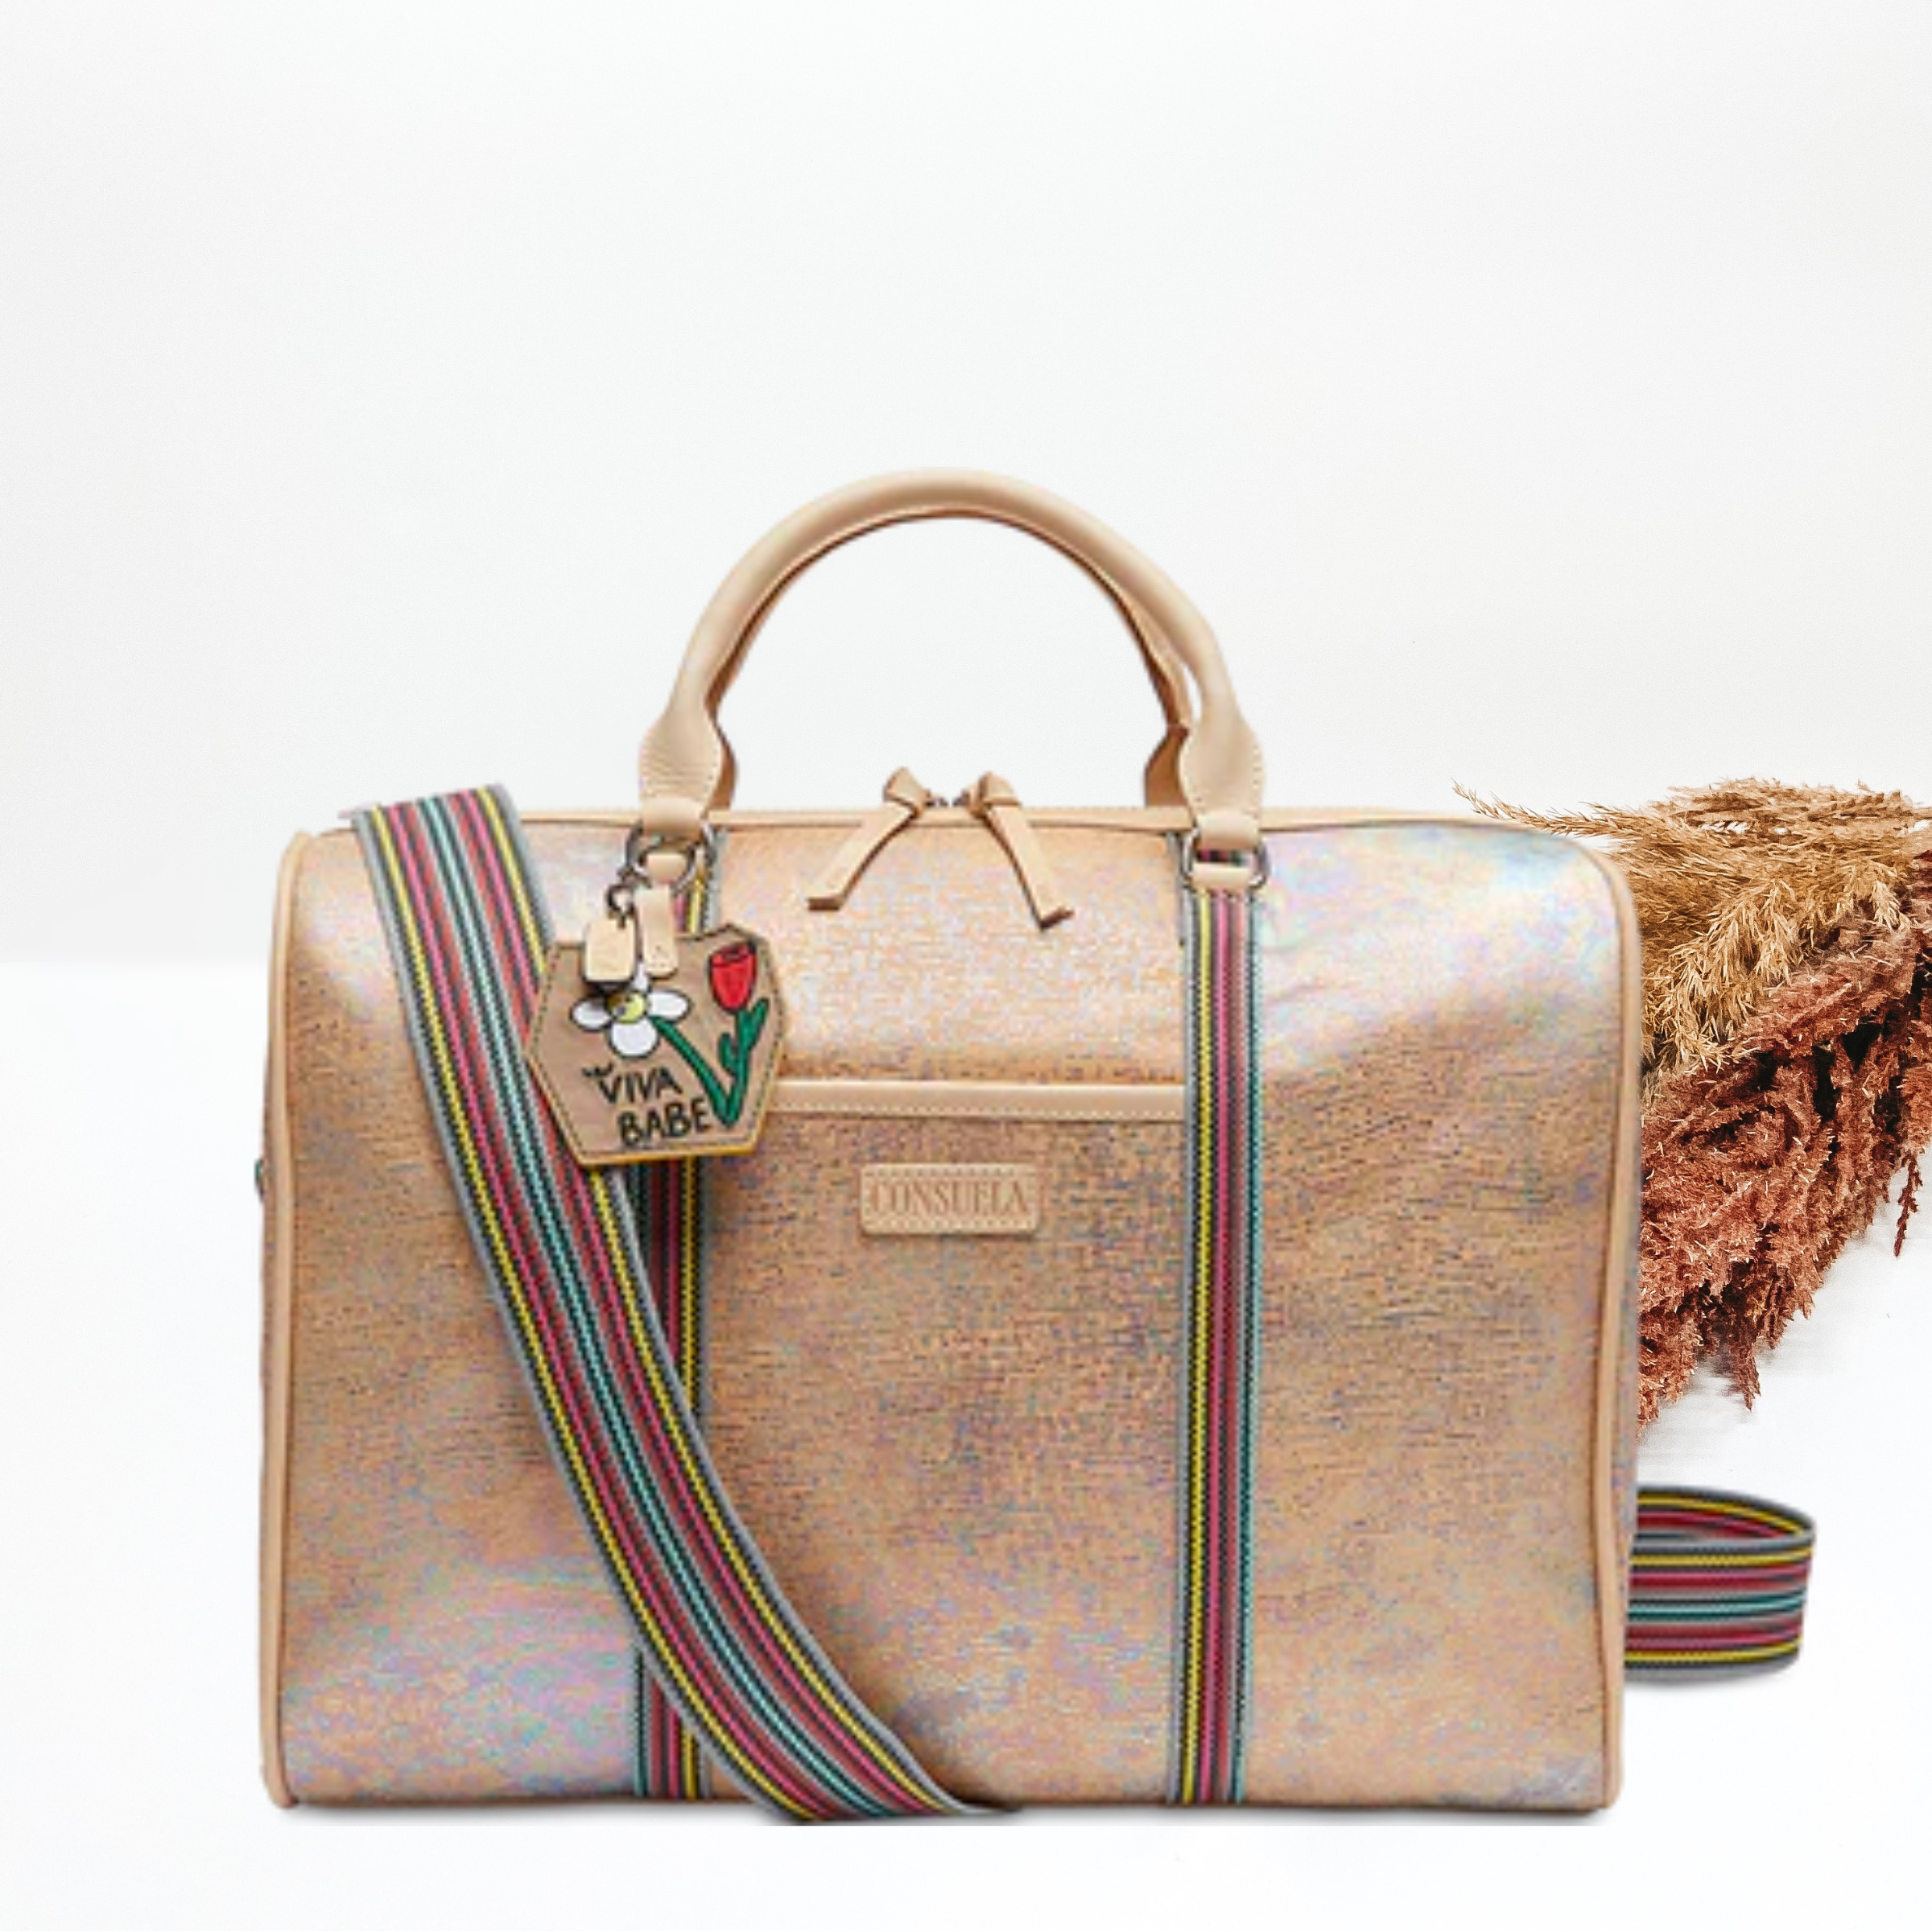 Pictured is a duffle bag with iridescent, multicolor design. This duffle bag includes short, light tan handles and a long, striped strap. This bag is pictured on a white background with pompous grass on the left side of the picture.